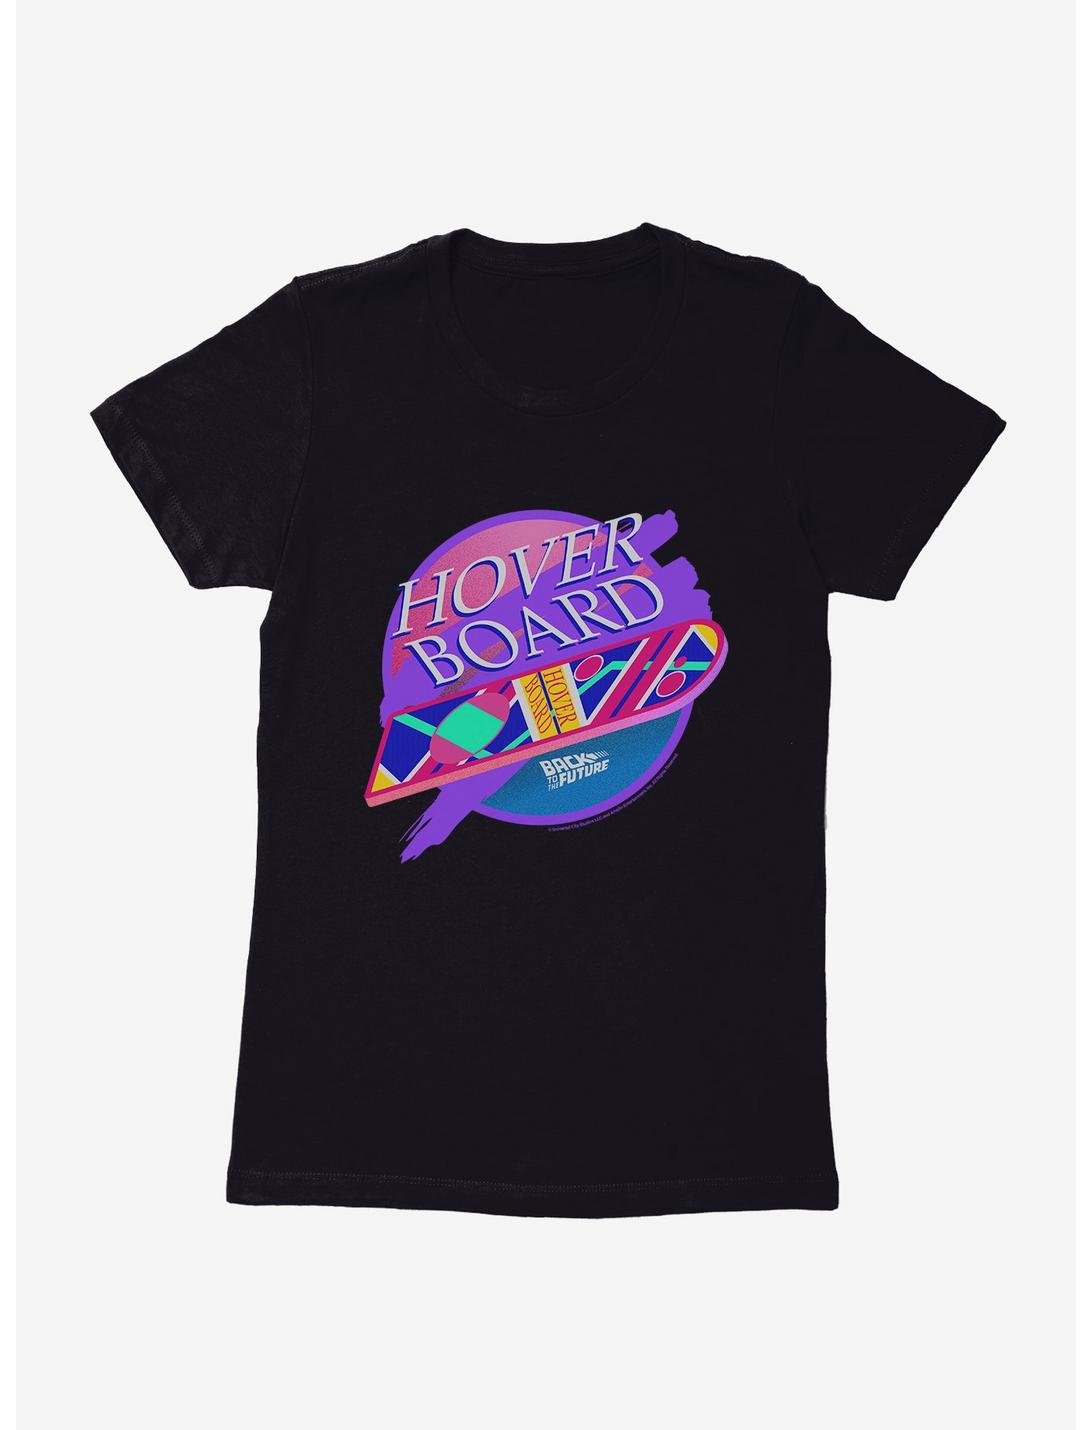 Back To The Future Hover Board Womens T-Shirt, BLACK, hi-res